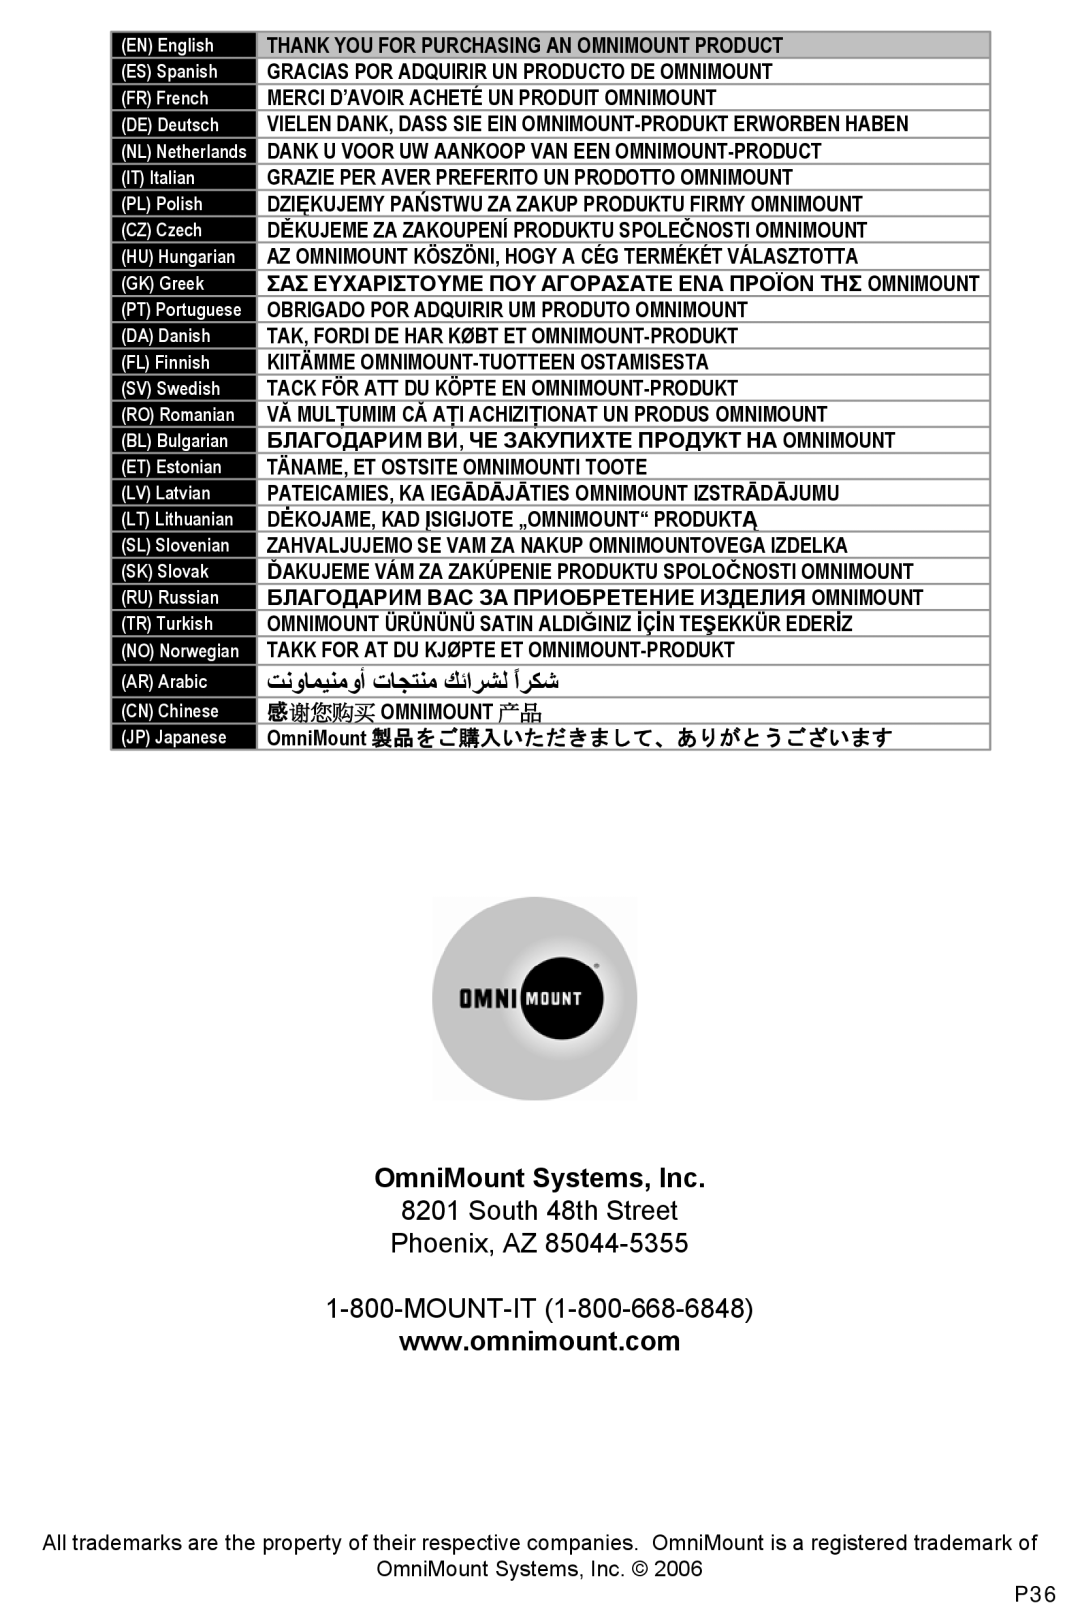 Omnimount ULPC-X, OM1004107 OmniMount Systems, Inc, Thank You For Purchasing An Omnimount Product, 感 谢 您 购买 Omnimount 产 品 